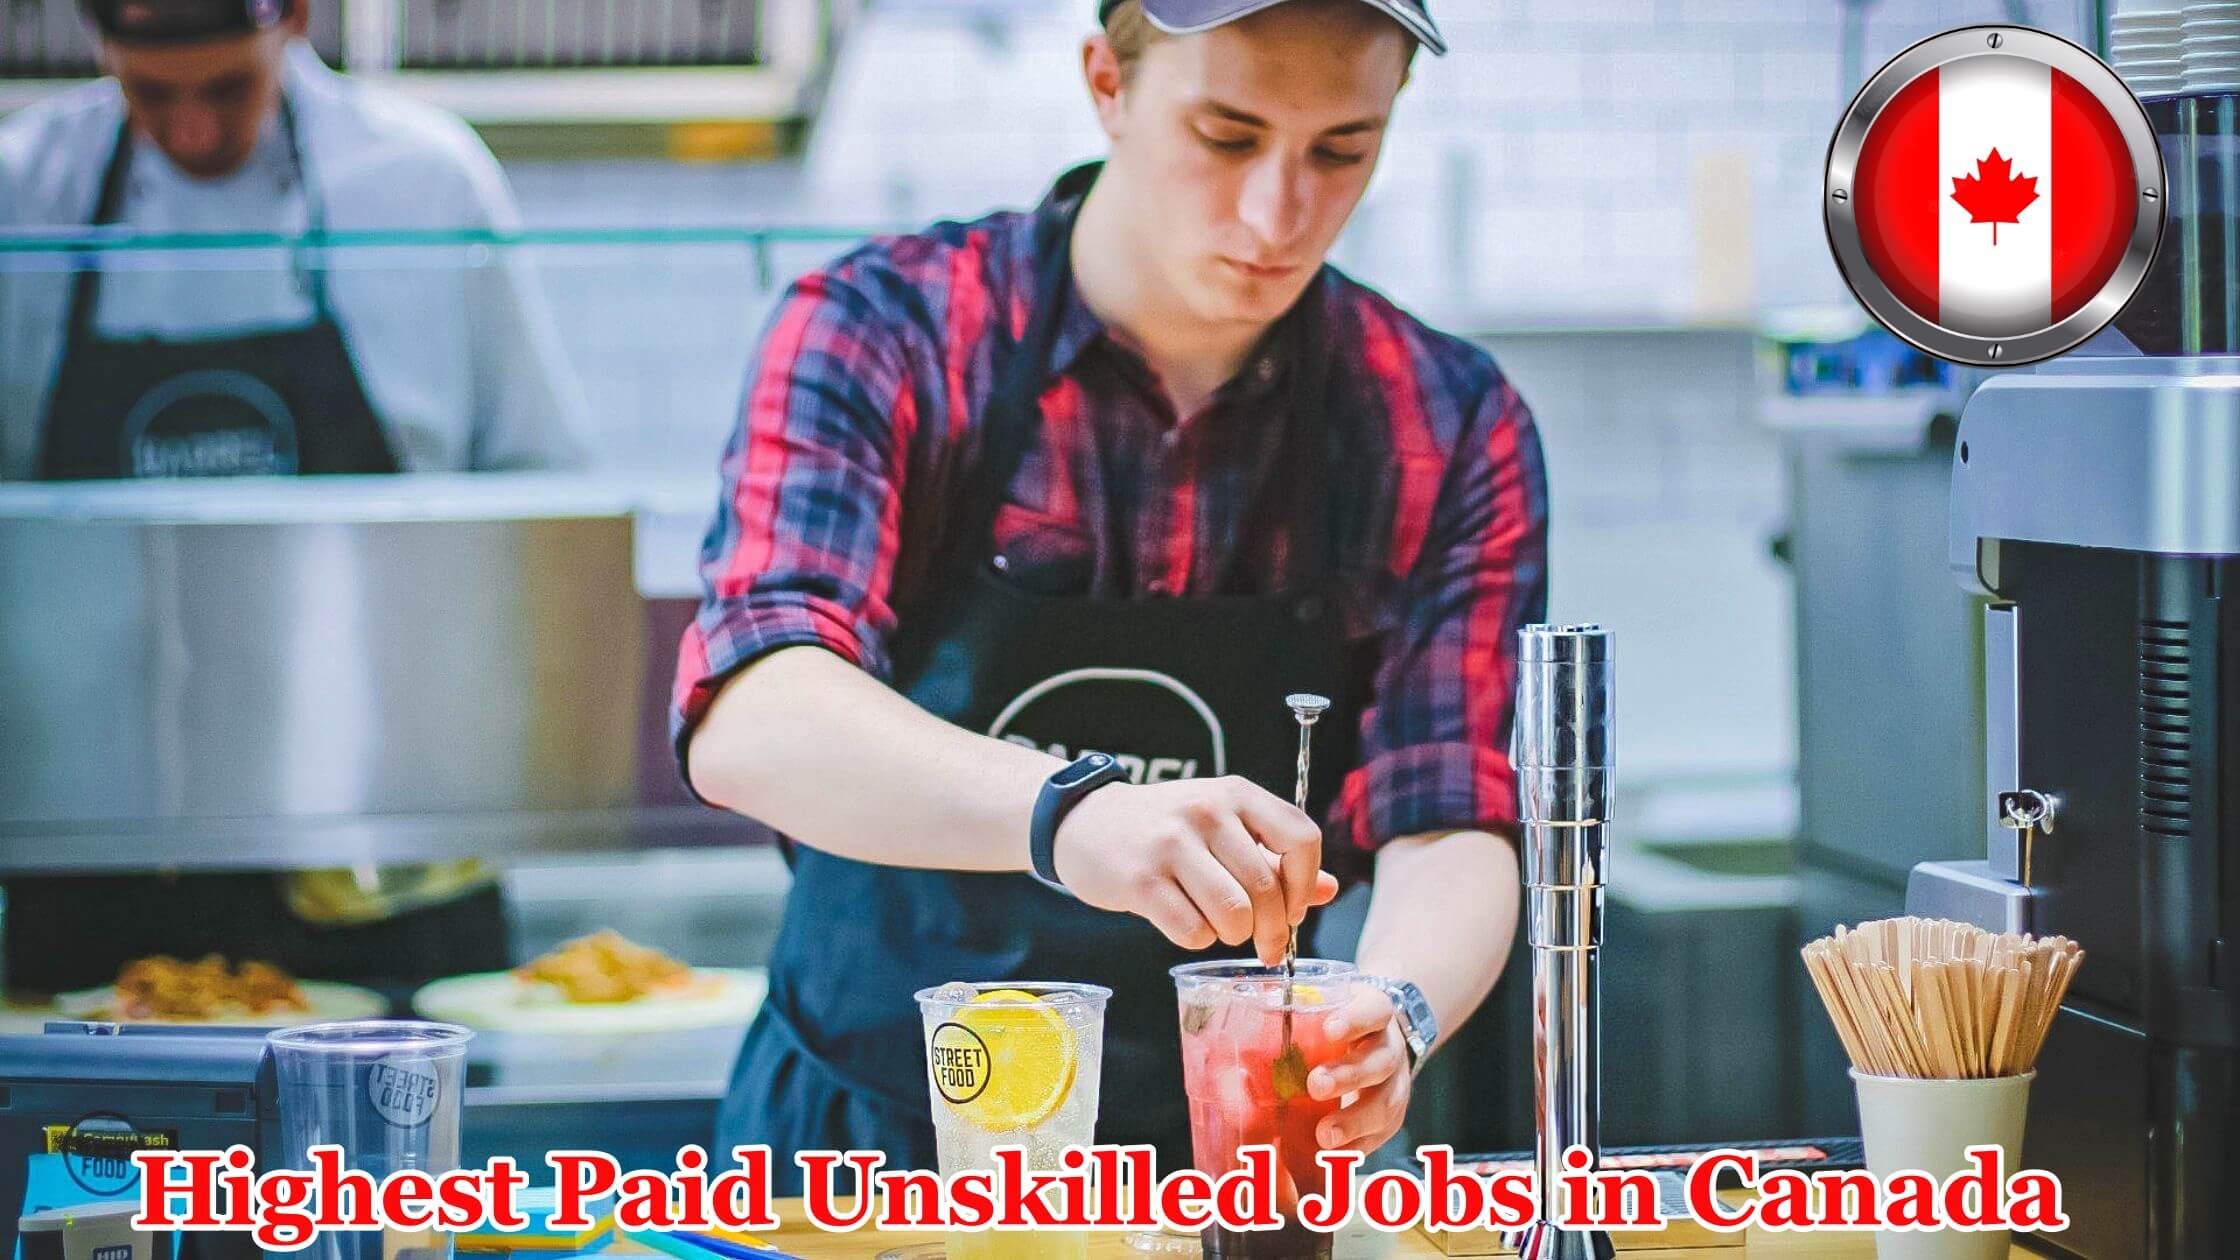 Unskilled Jobs in Canada image